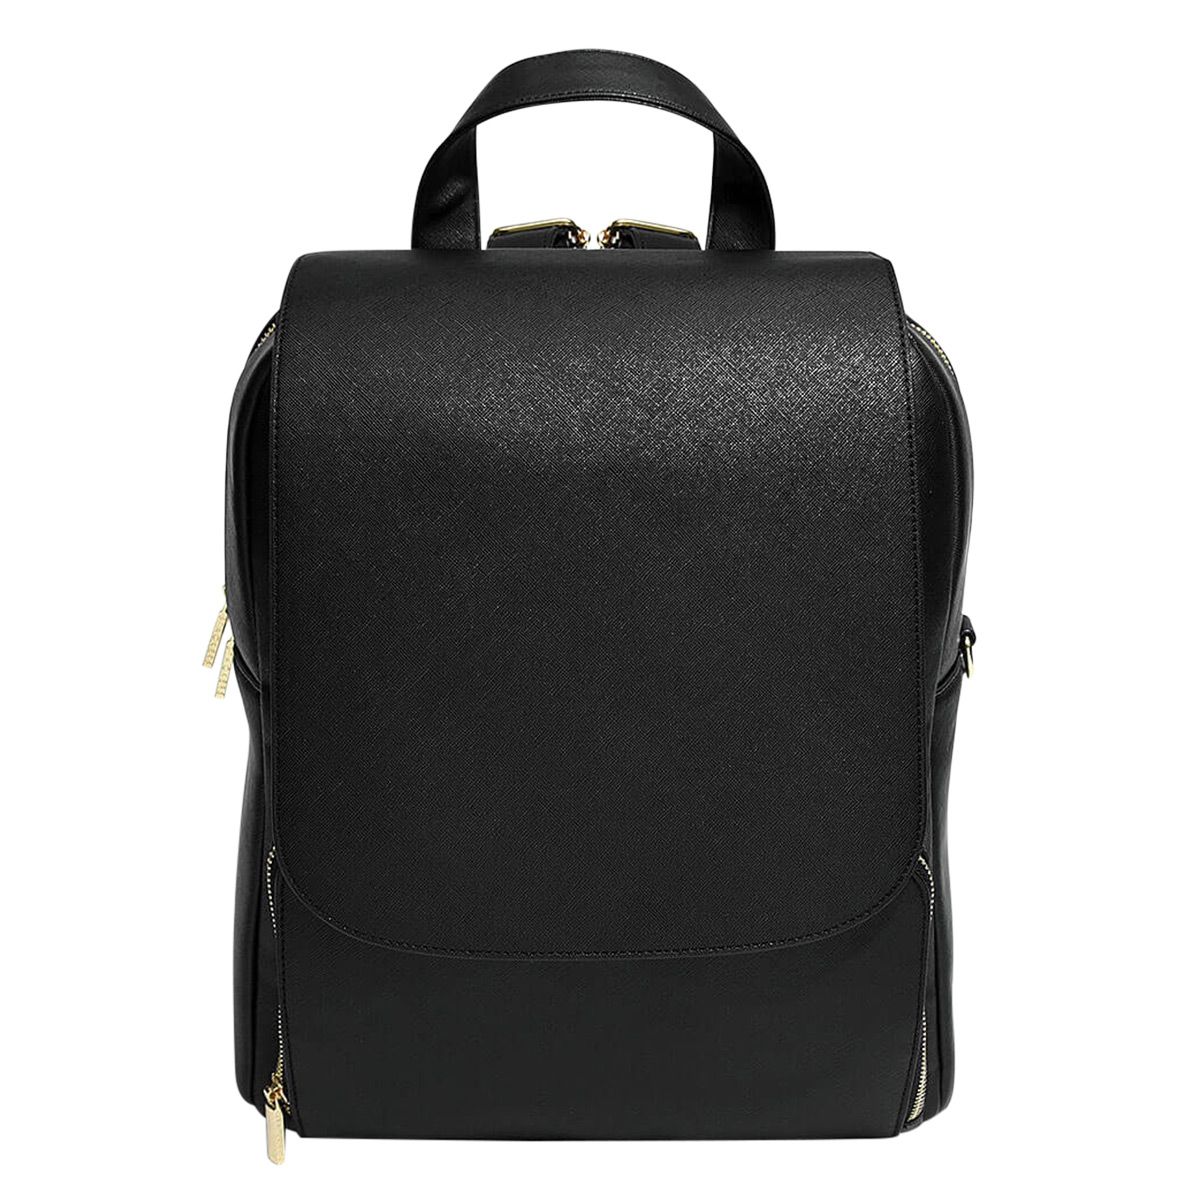 Stackers Laptop Backpack Black | The Container Store